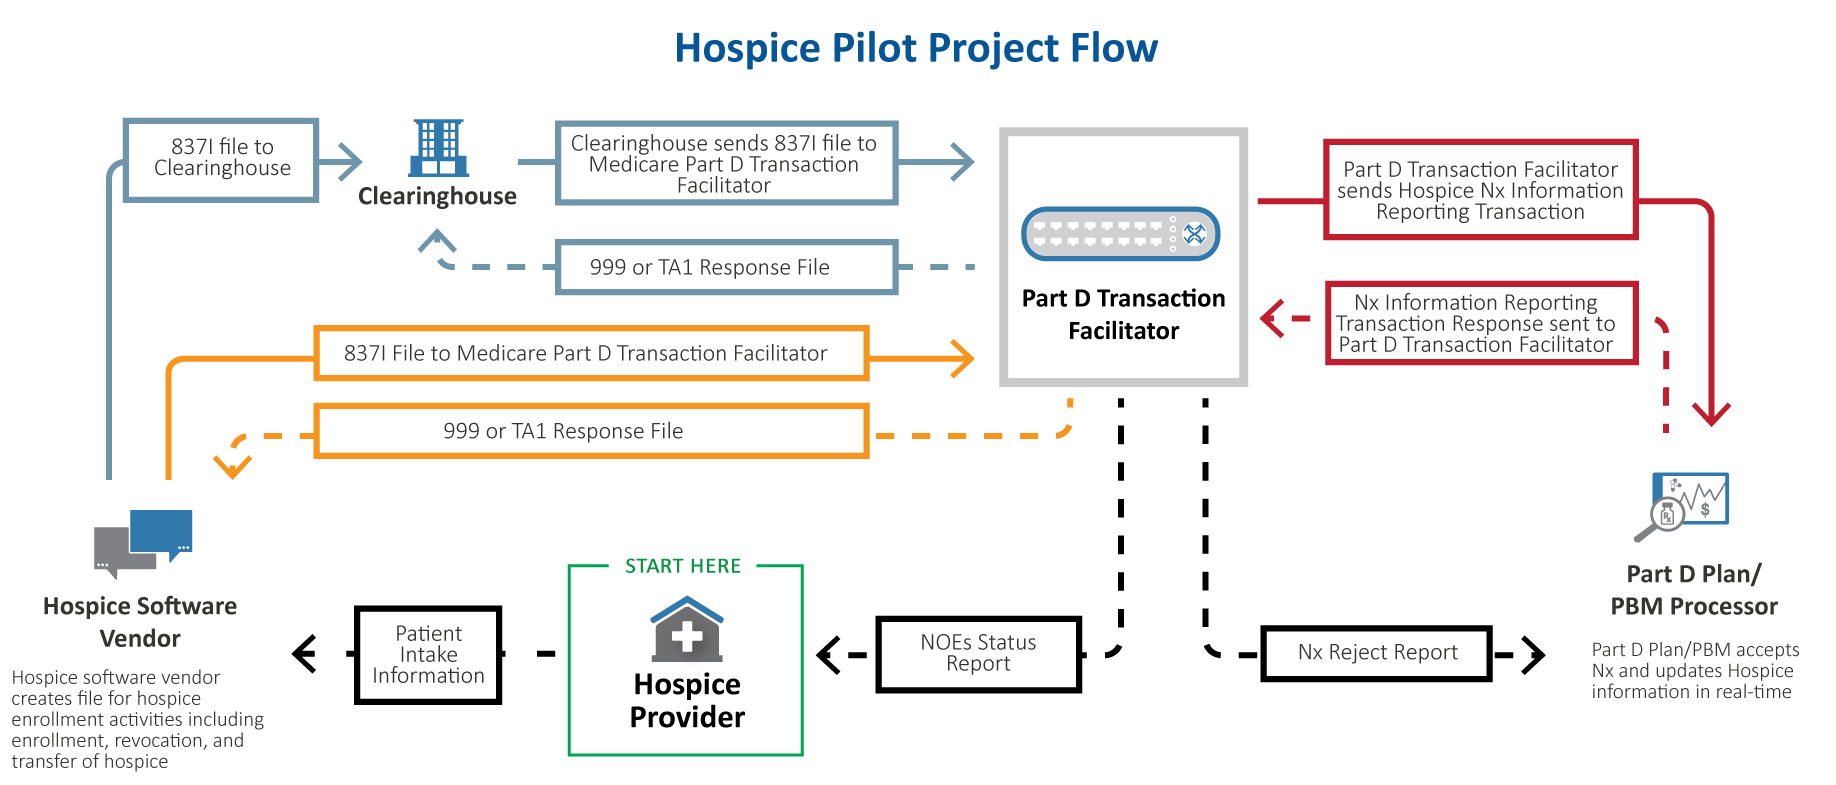 A high-level summary of the notification process for Hospice